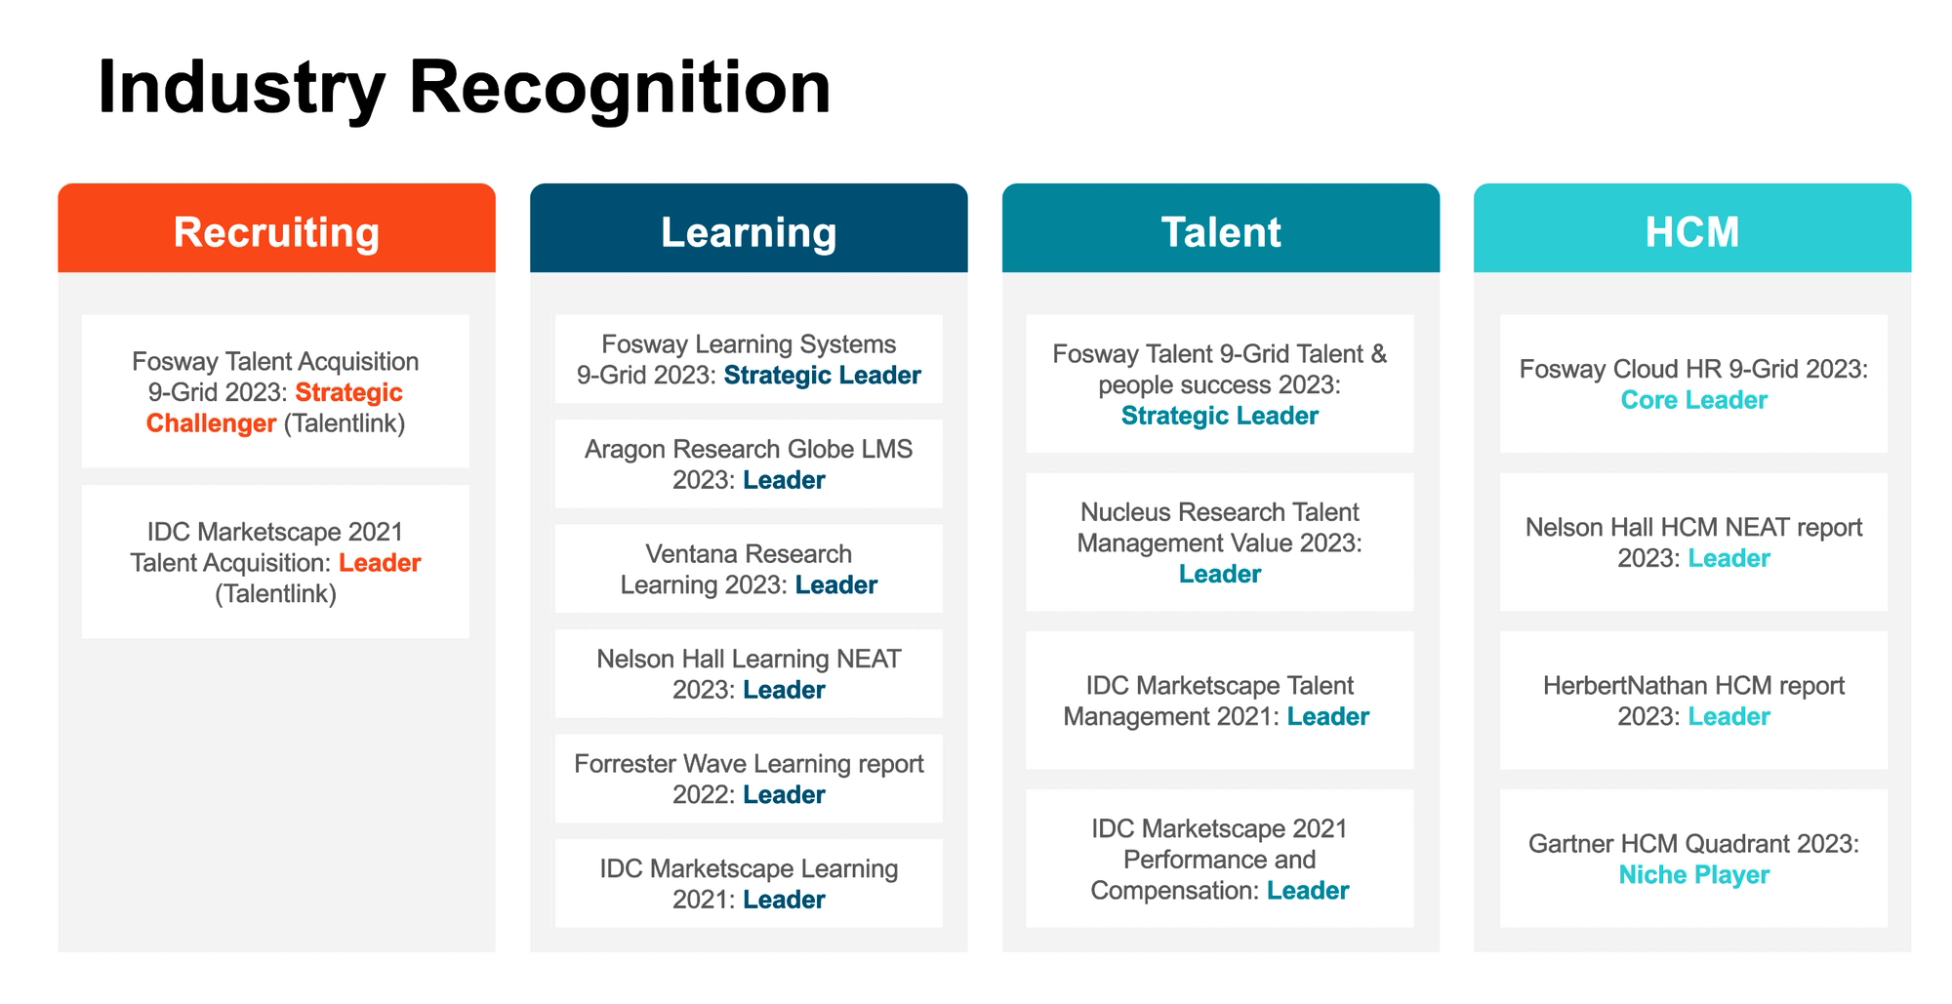 Analysts validate Cornerstone as a leader in recruiting, learning, talent and HCM